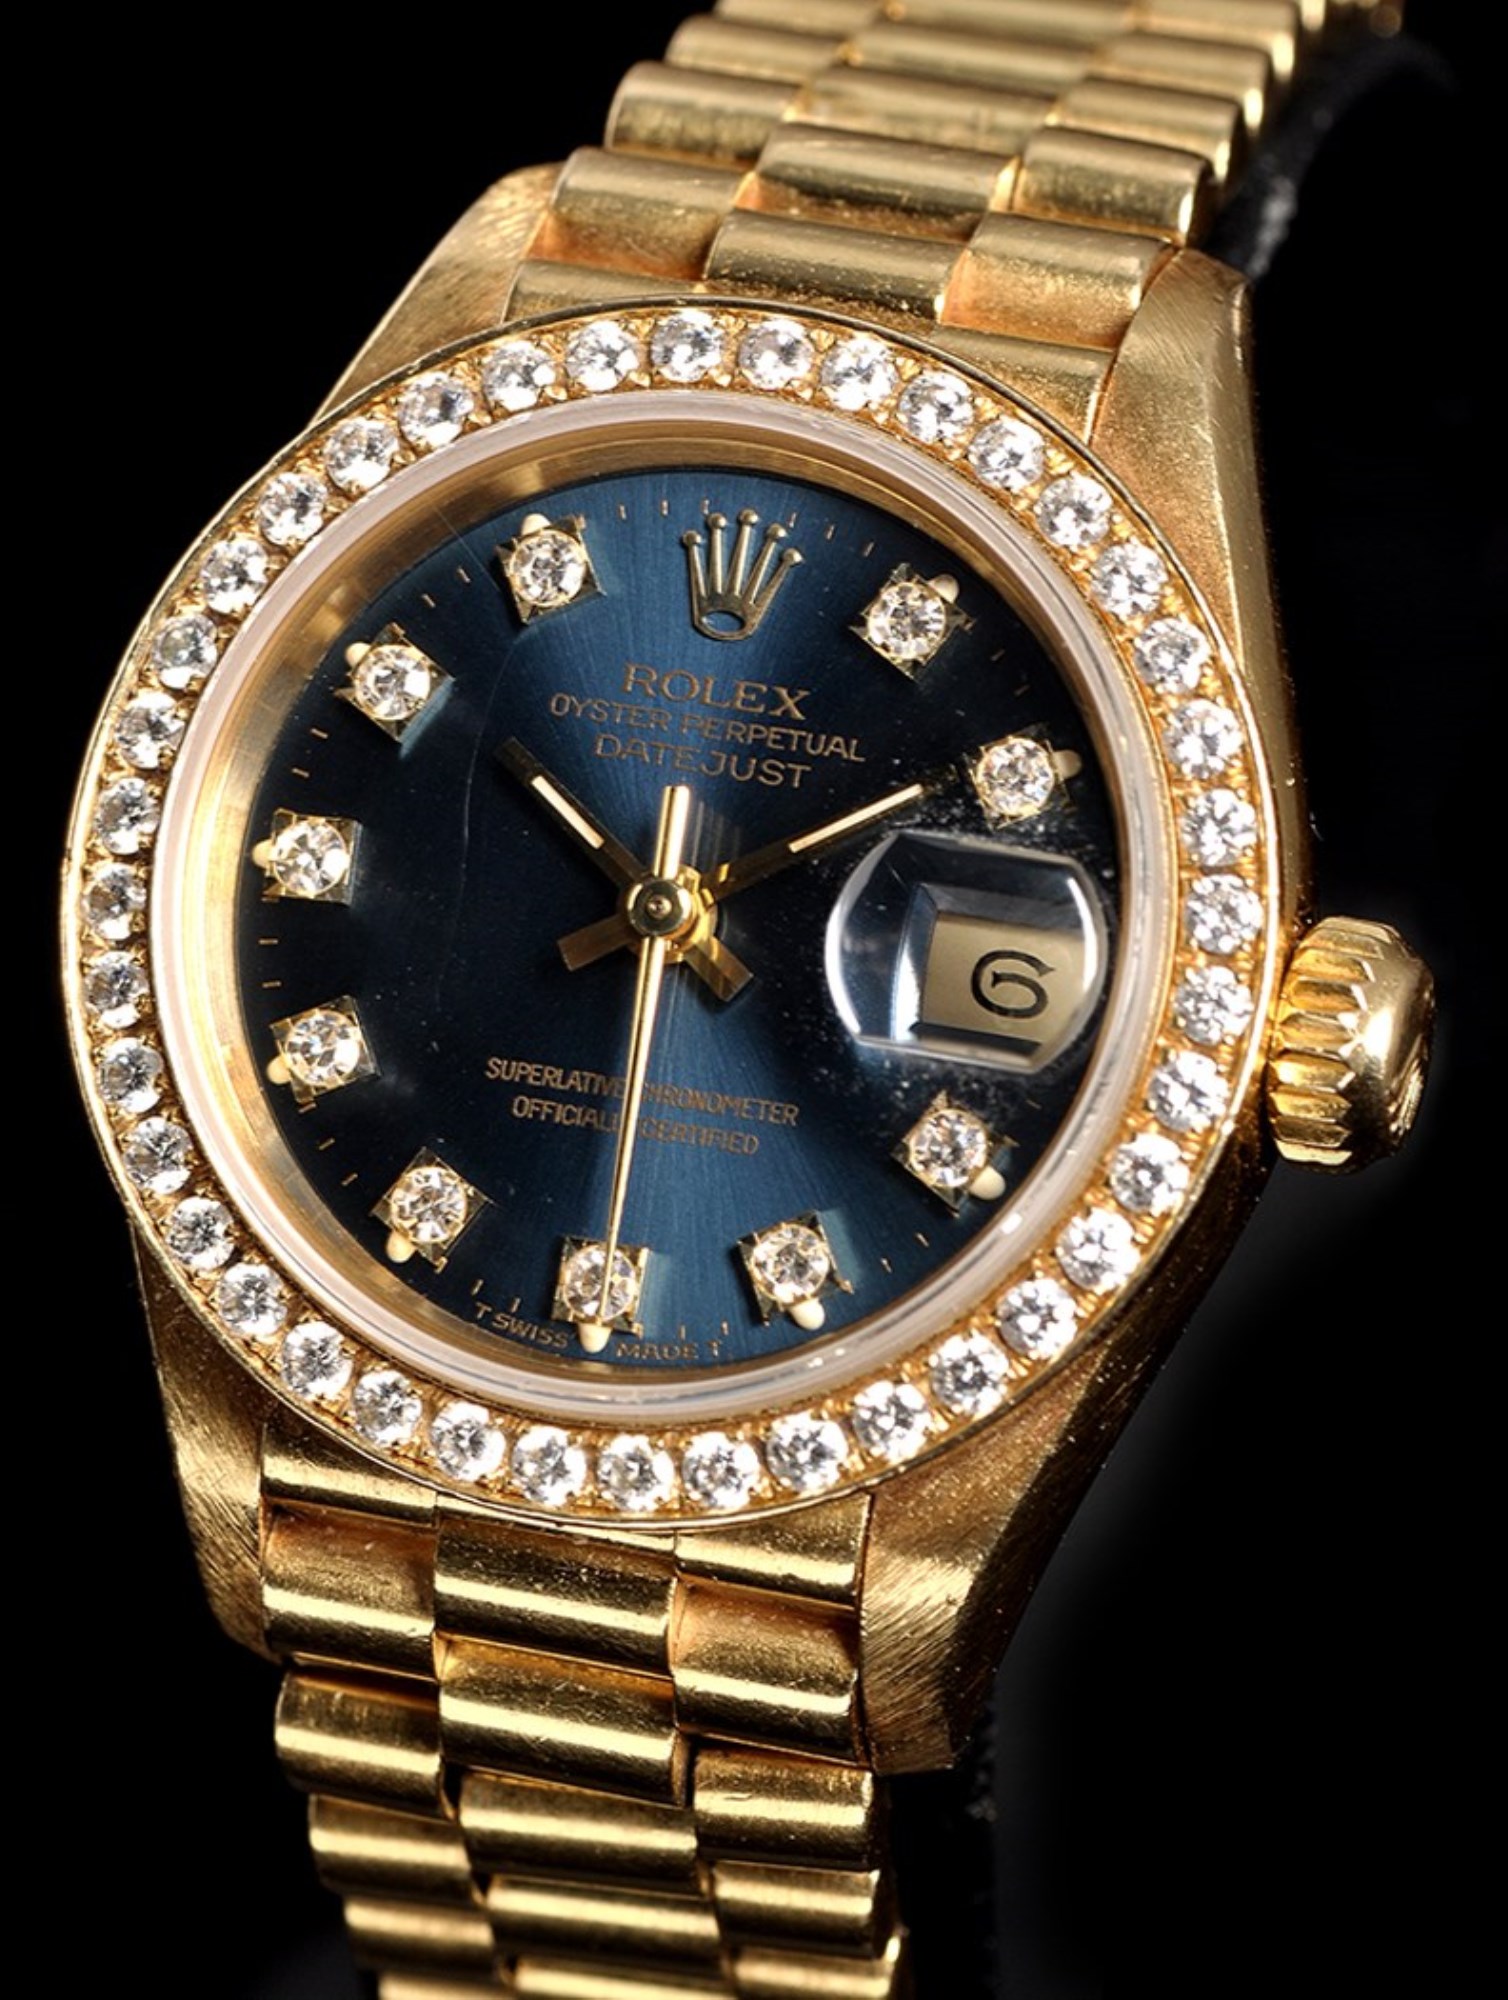 Lot 846 - Rolex Oyster Perpetual Datejust: a lady's